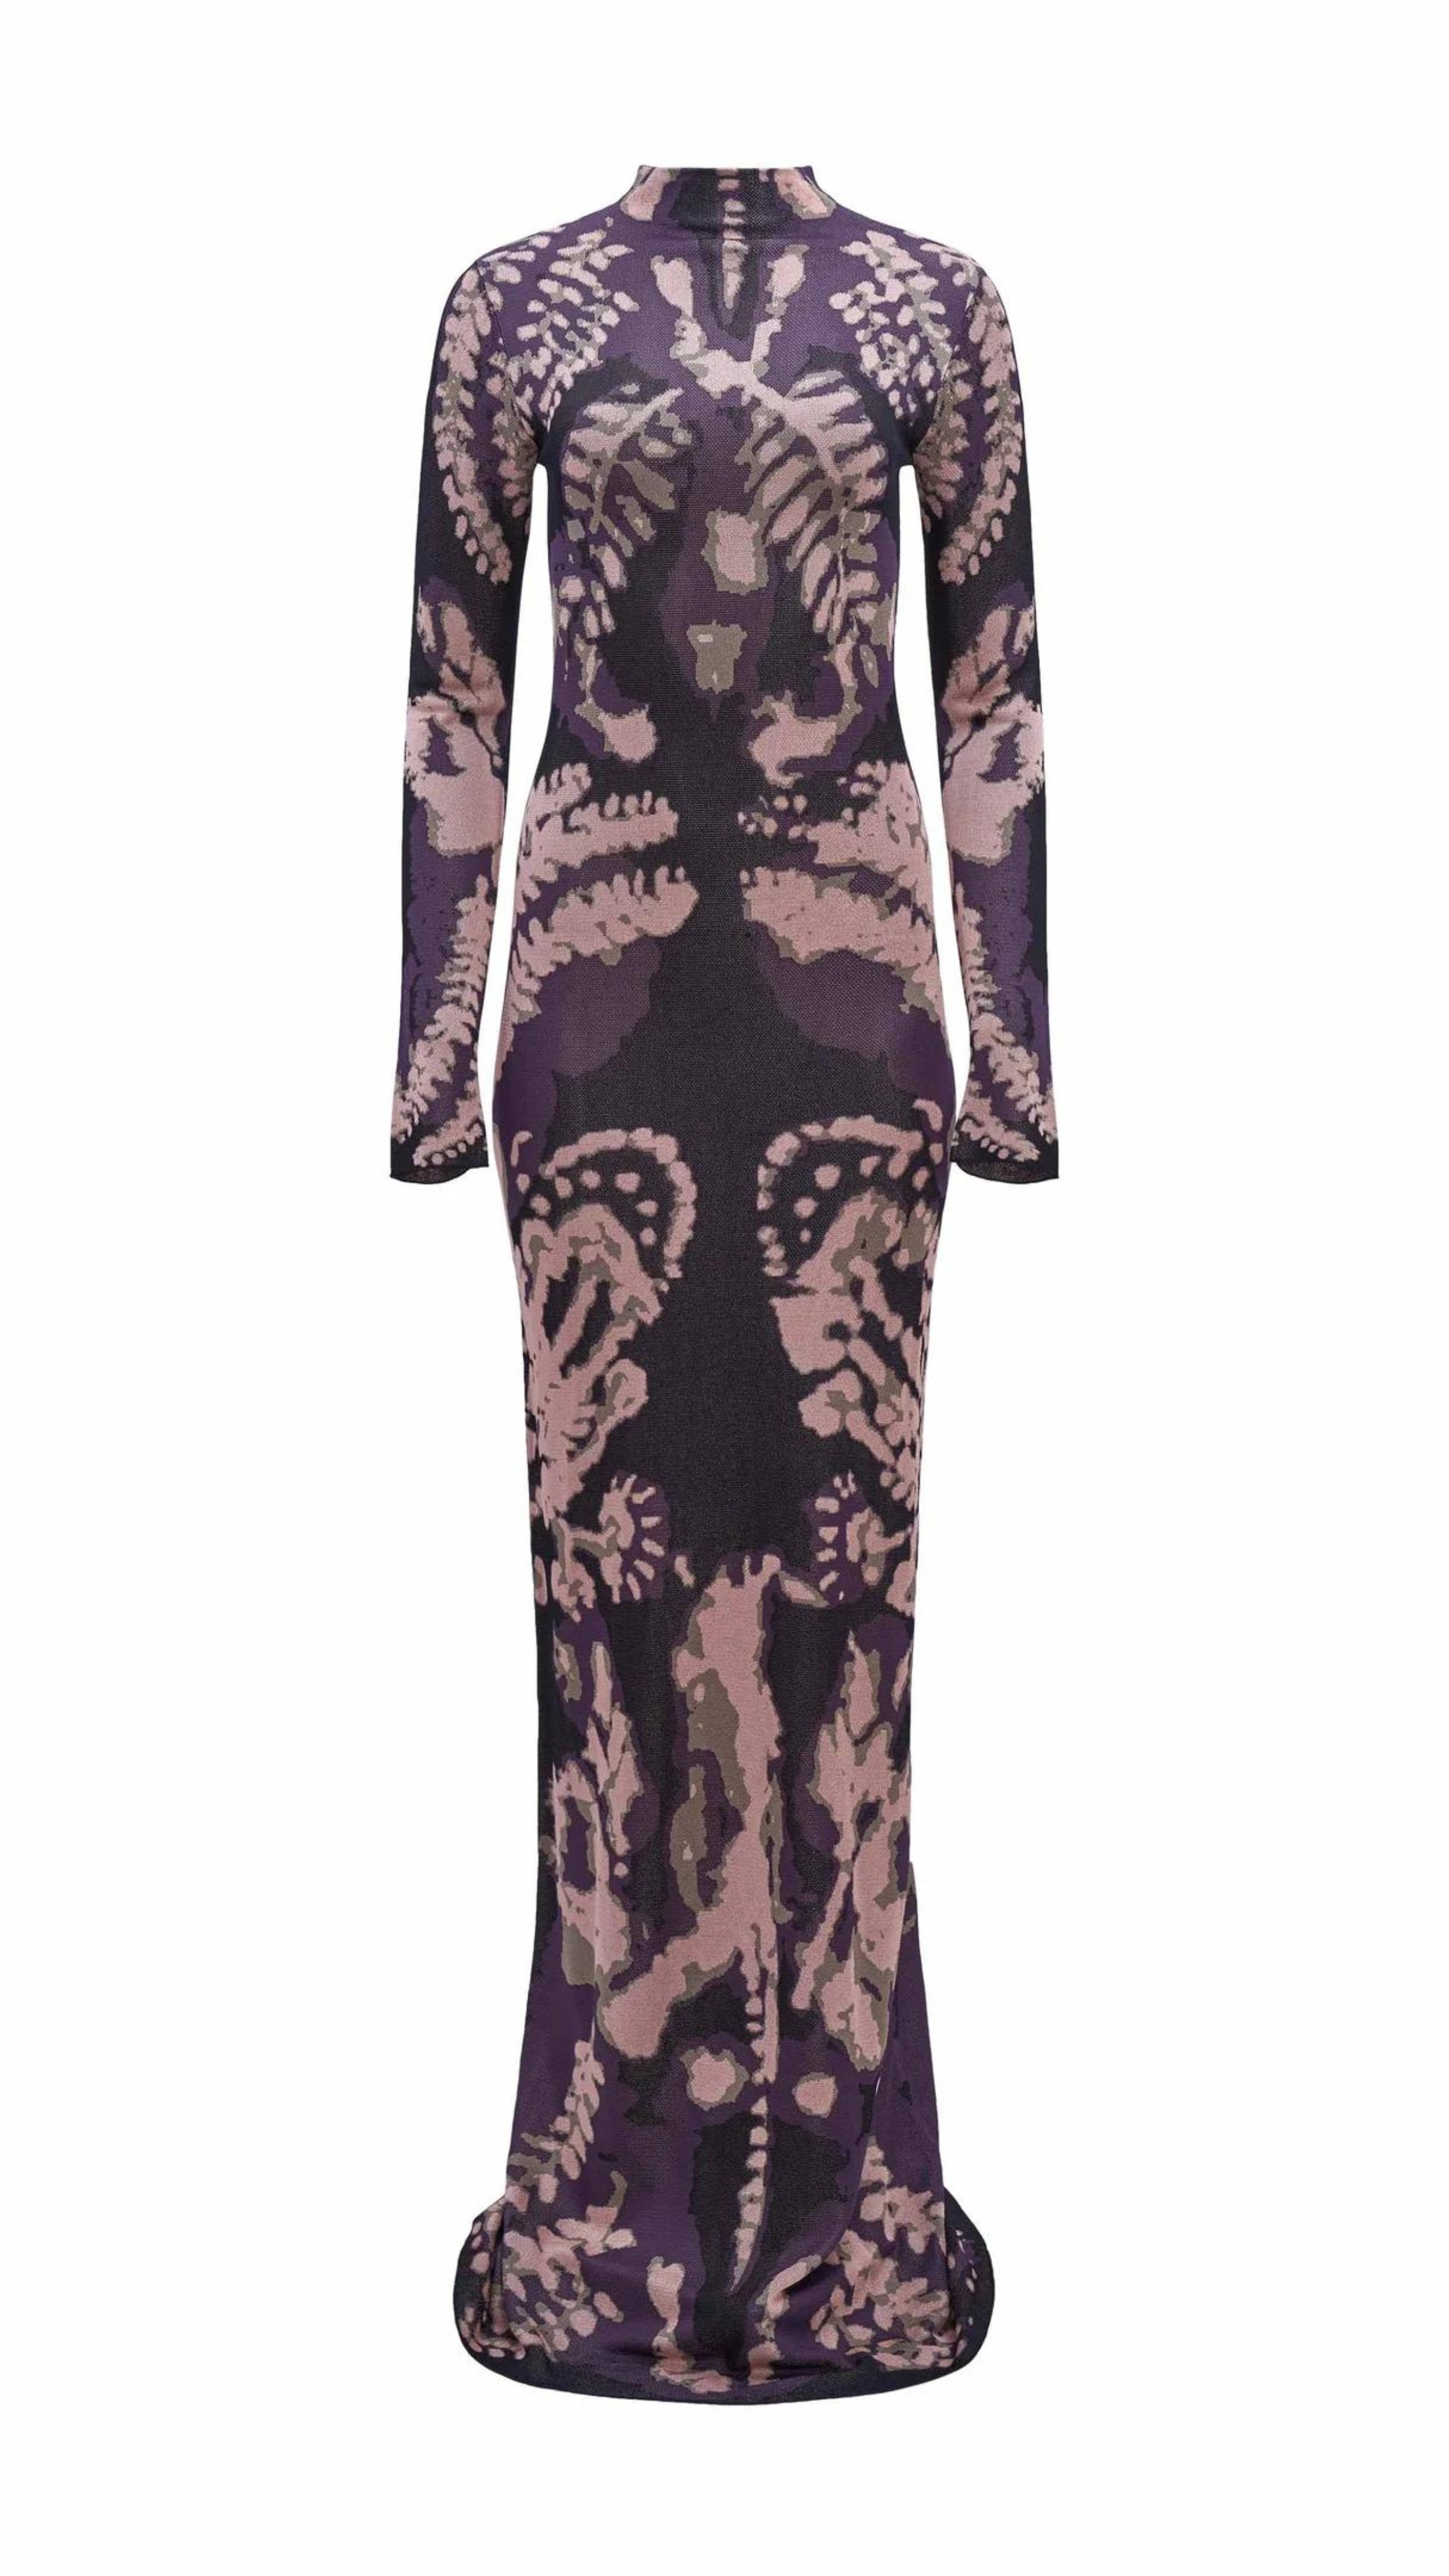 Altuzarra Rhea Dress. Knit dress in the rorschach in deep purple and pale pink. with a mock turtleneck, long sleeves and maxi length. Photo shows front view